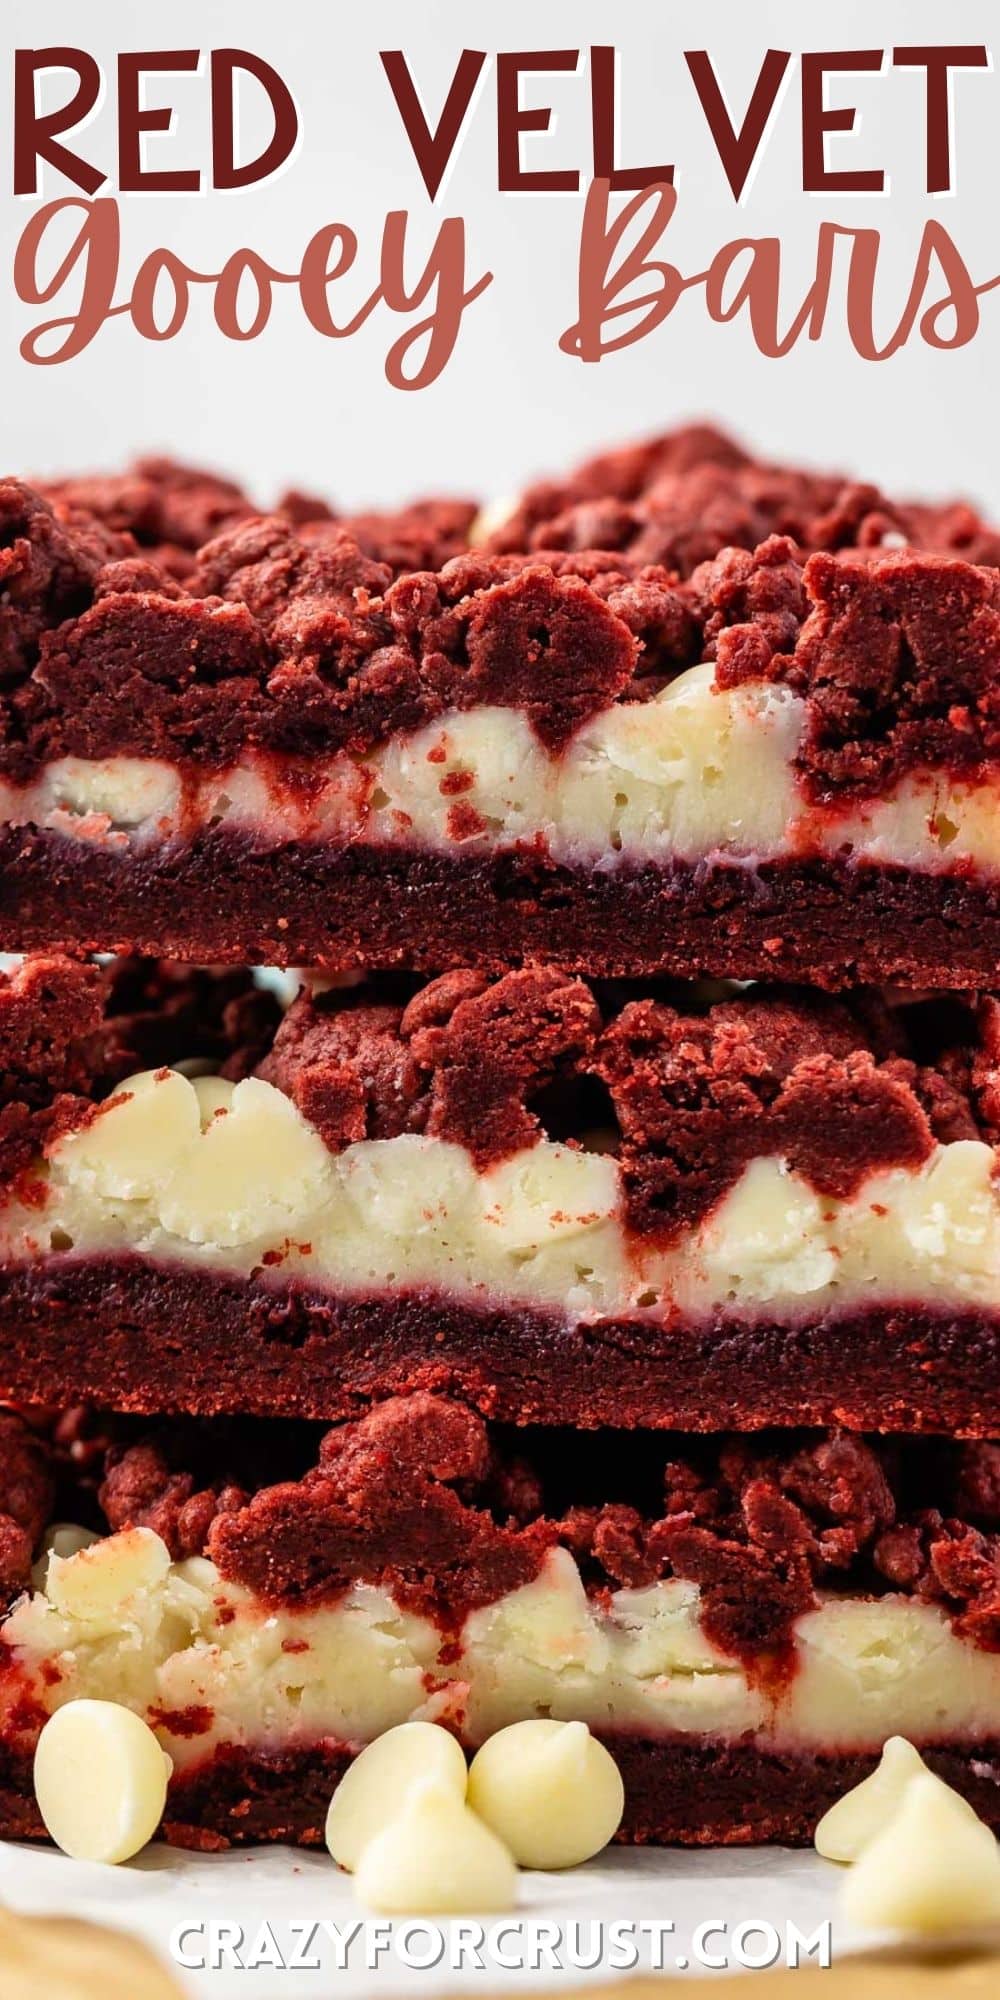 stacked red velvet gooey bars with white chocolate chips sprinkled around with words on the image.